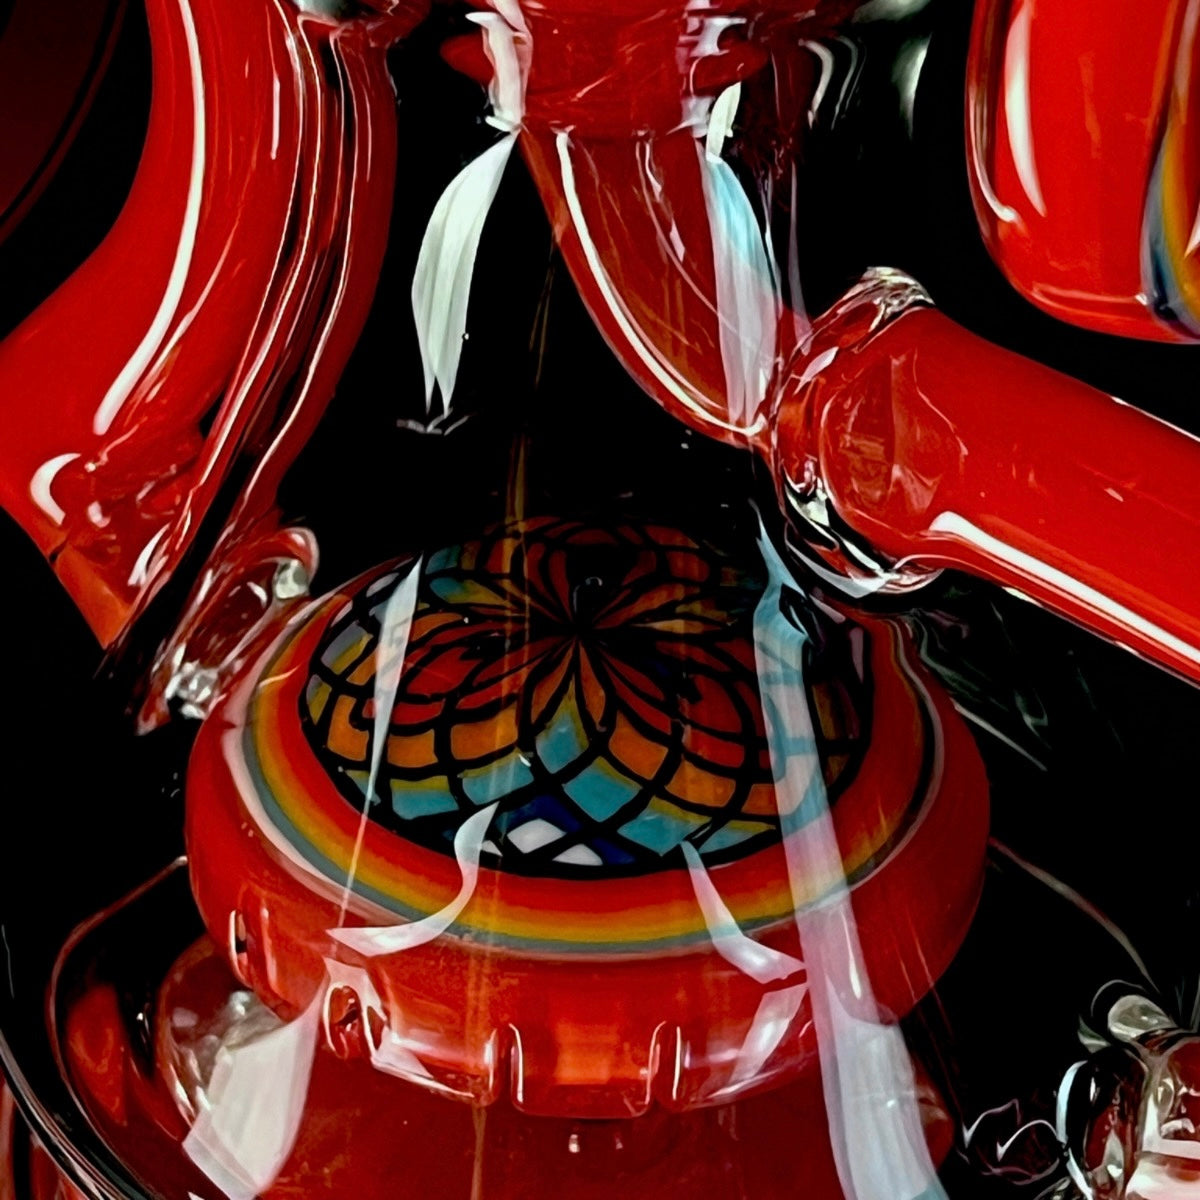 “Kiss the Filla” by Distortion Glass